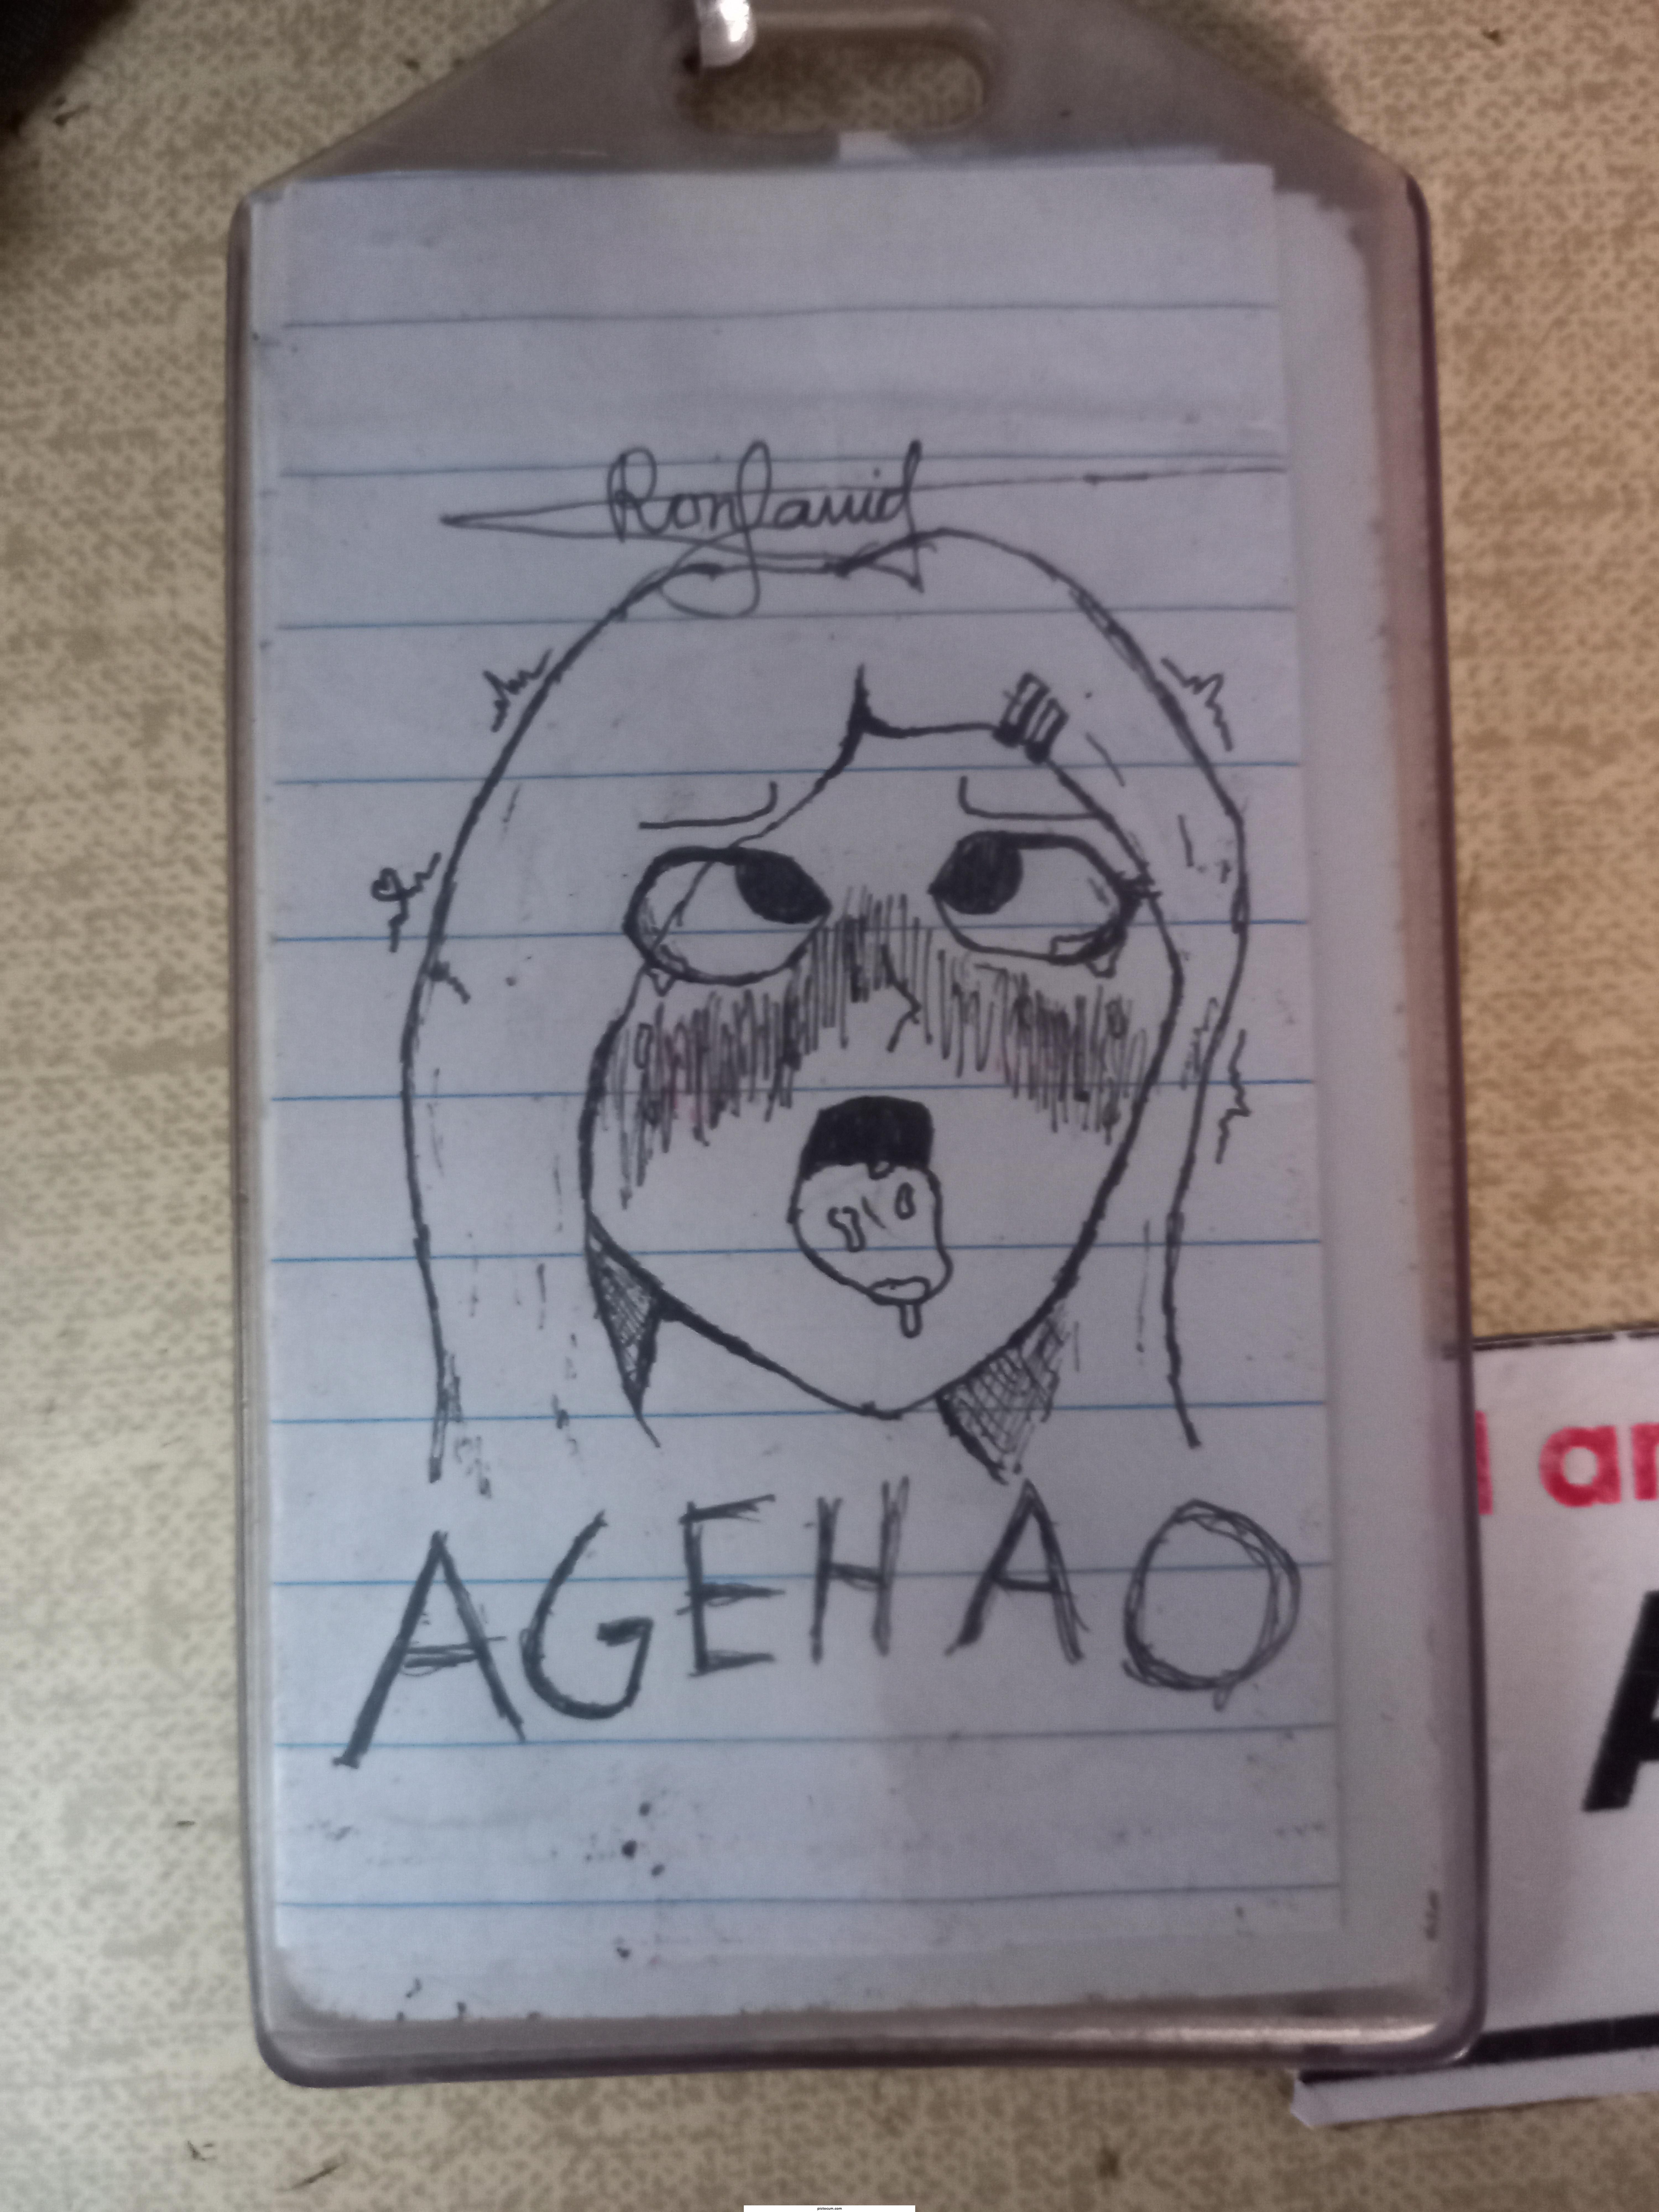 Drew this in school and yes, i mispelled ahegao